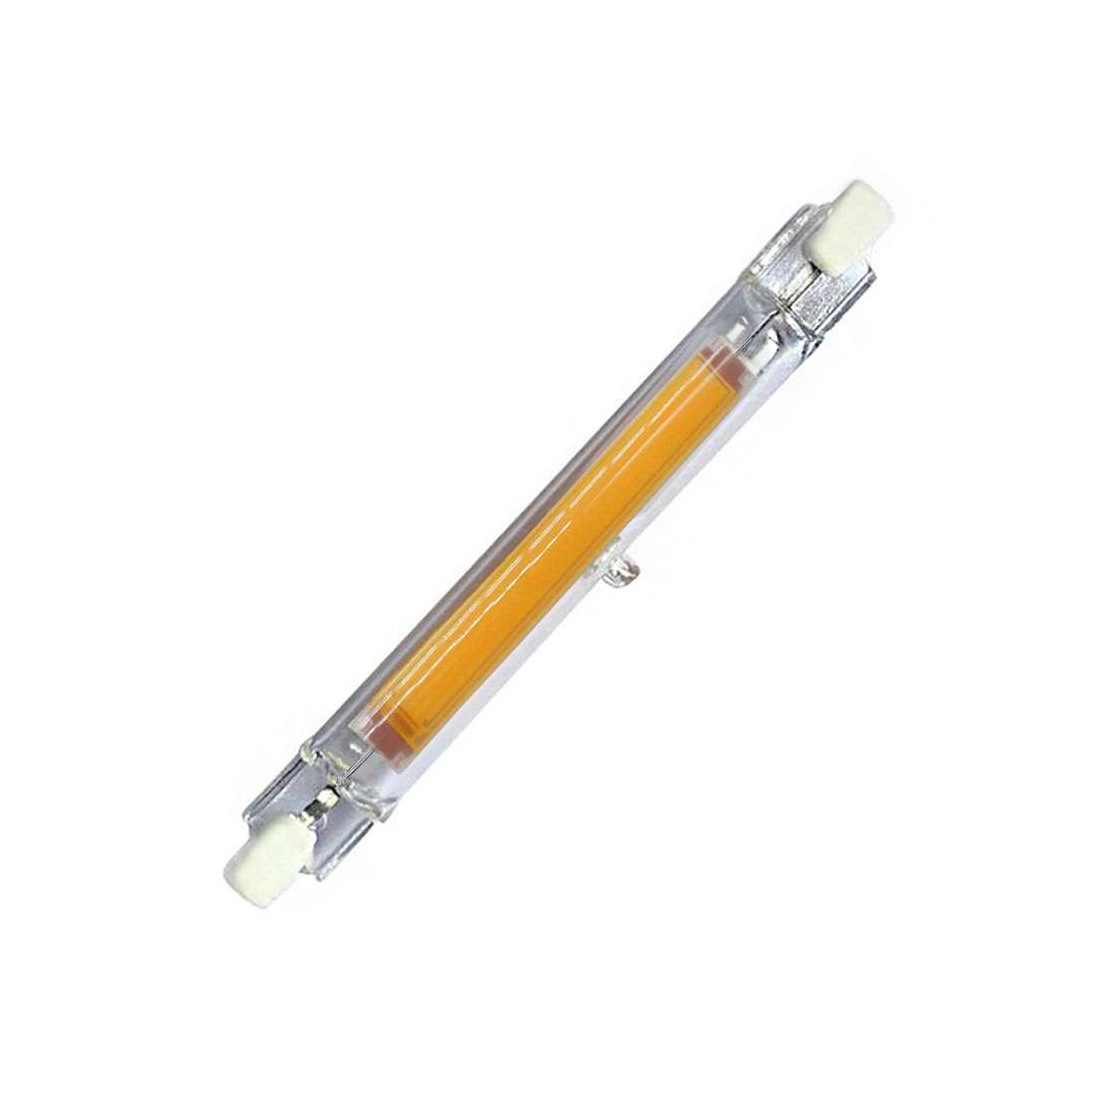 Ampoule LED R7s Ø13mm - LED linear COB dimmable * 78mm 5 watts